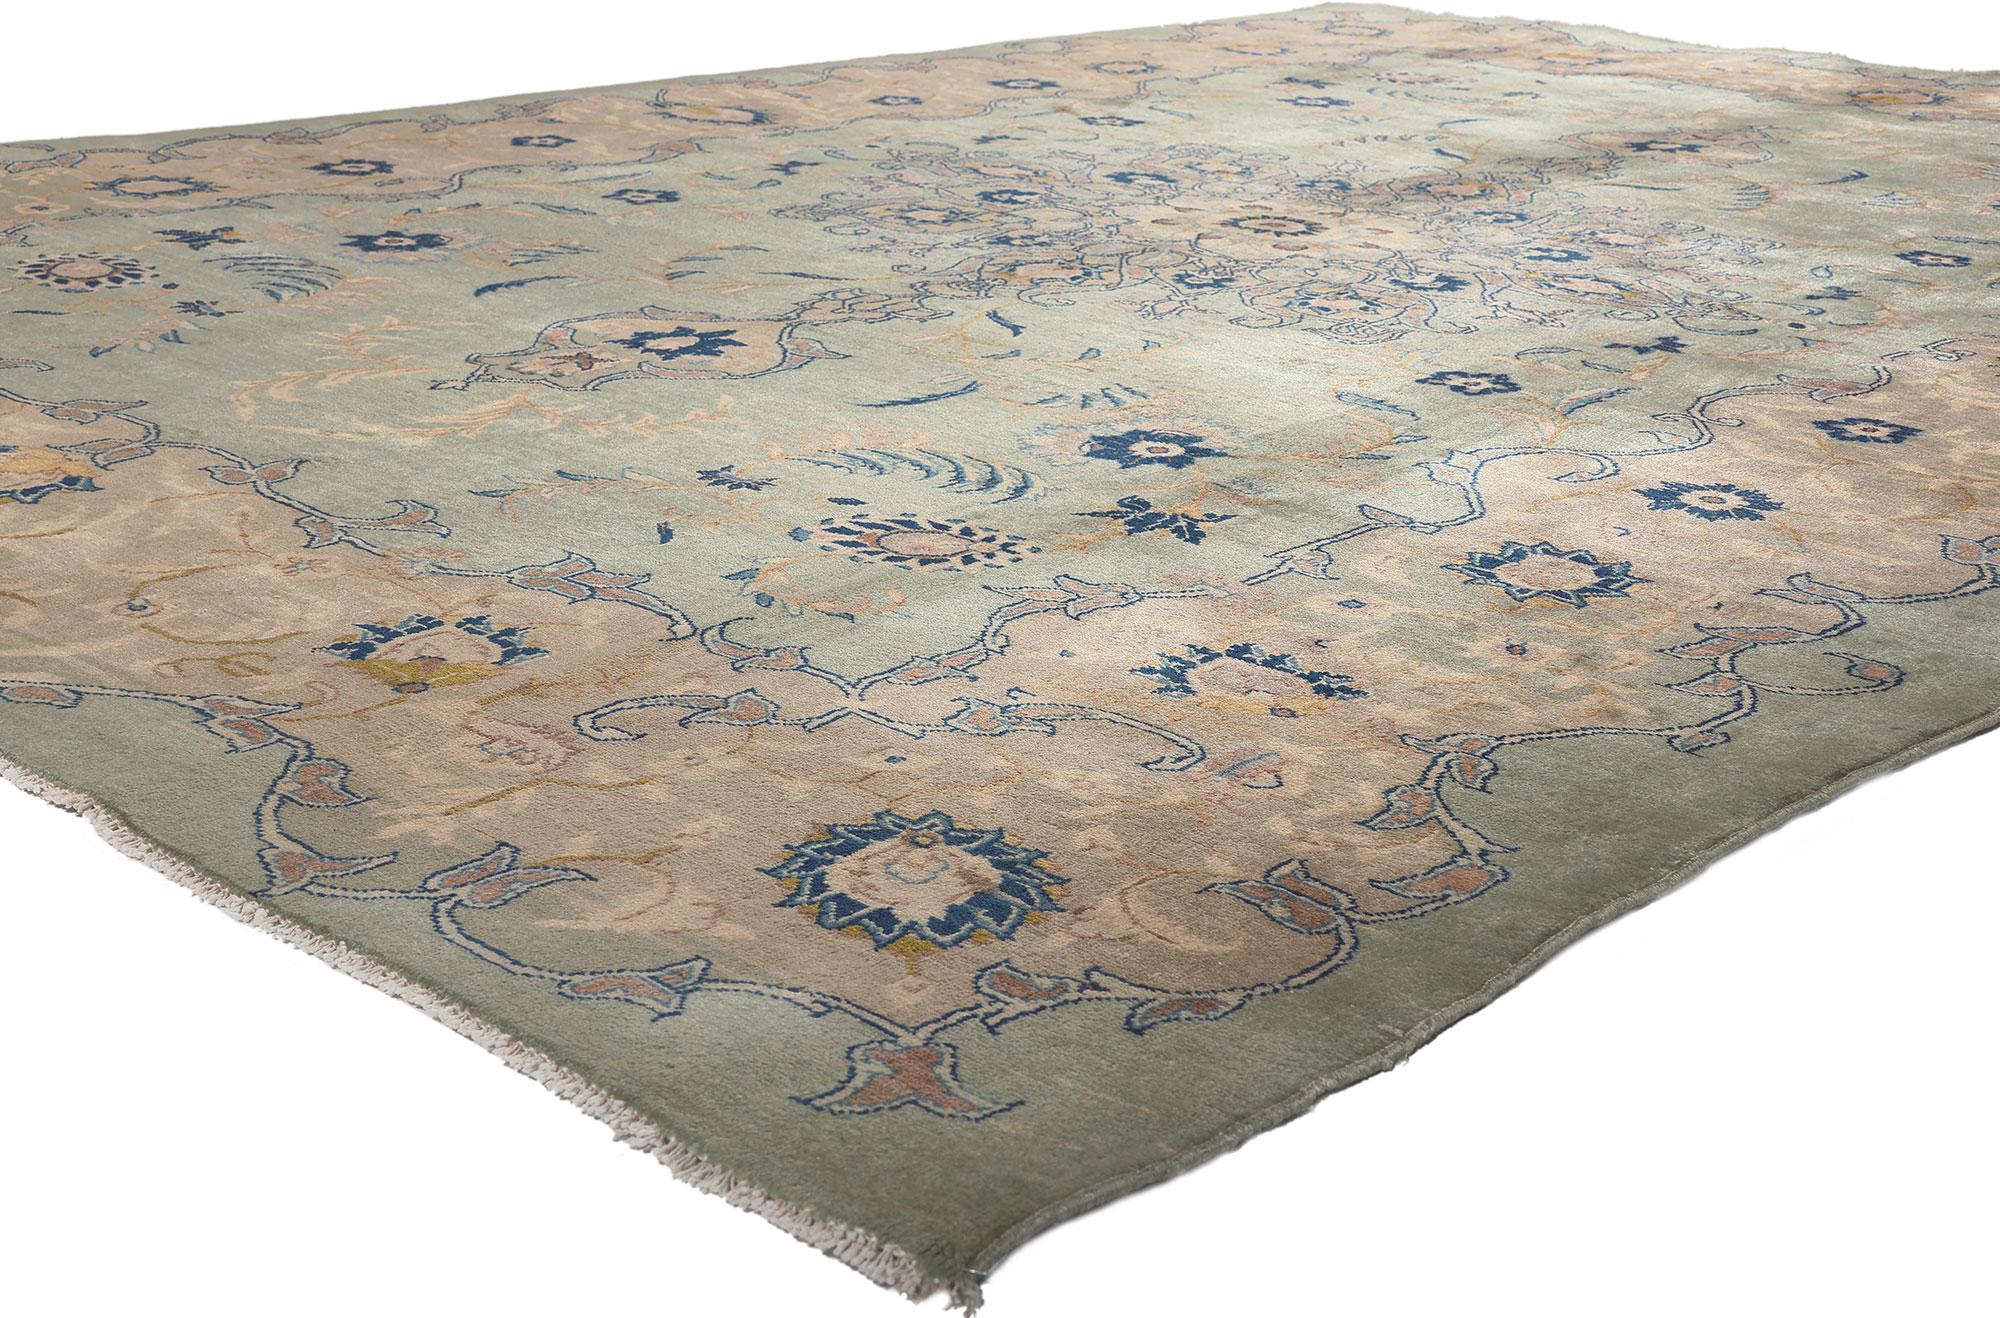 73574 Vintage Persian Kashan Rug, 08'04 x 11'06. 
Gustvian grace meets Neoclassic elegance in this vintage Persian Kashan rug. The delicate floral design and soft colors woven into this piece work together creating an elegant yet cozy atmosphere.